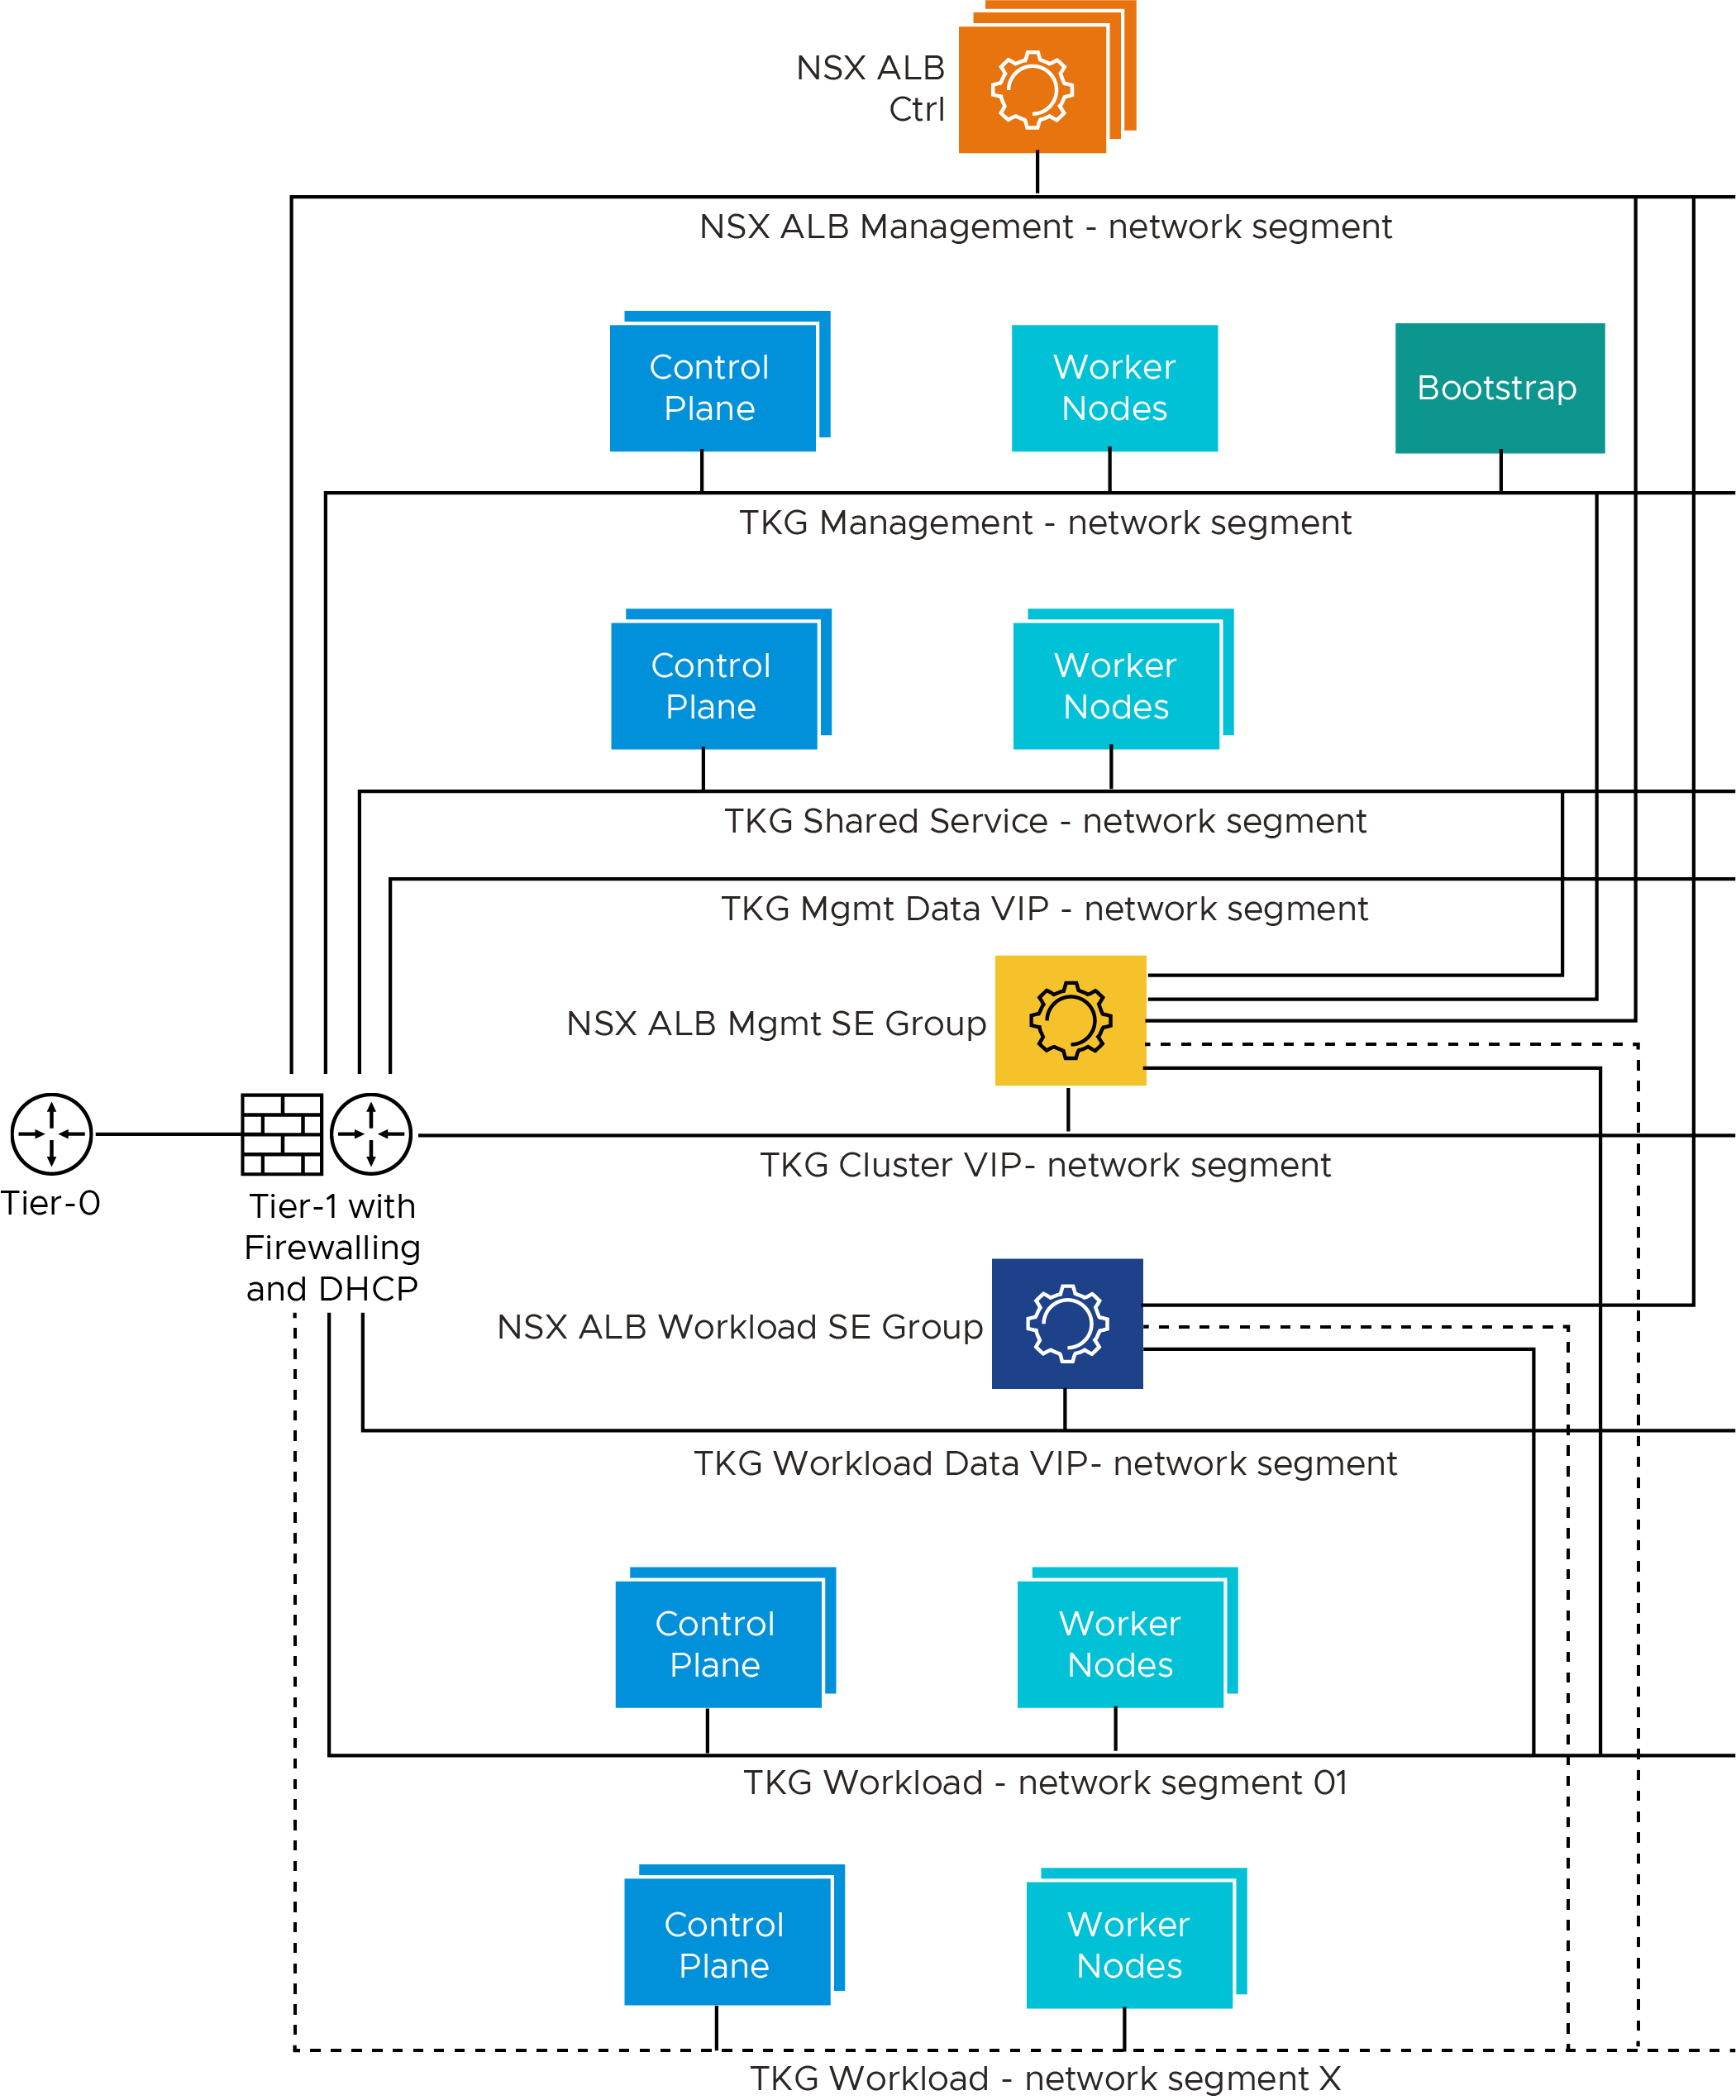 Network Design for TKO on vSphere with NSX-T networking